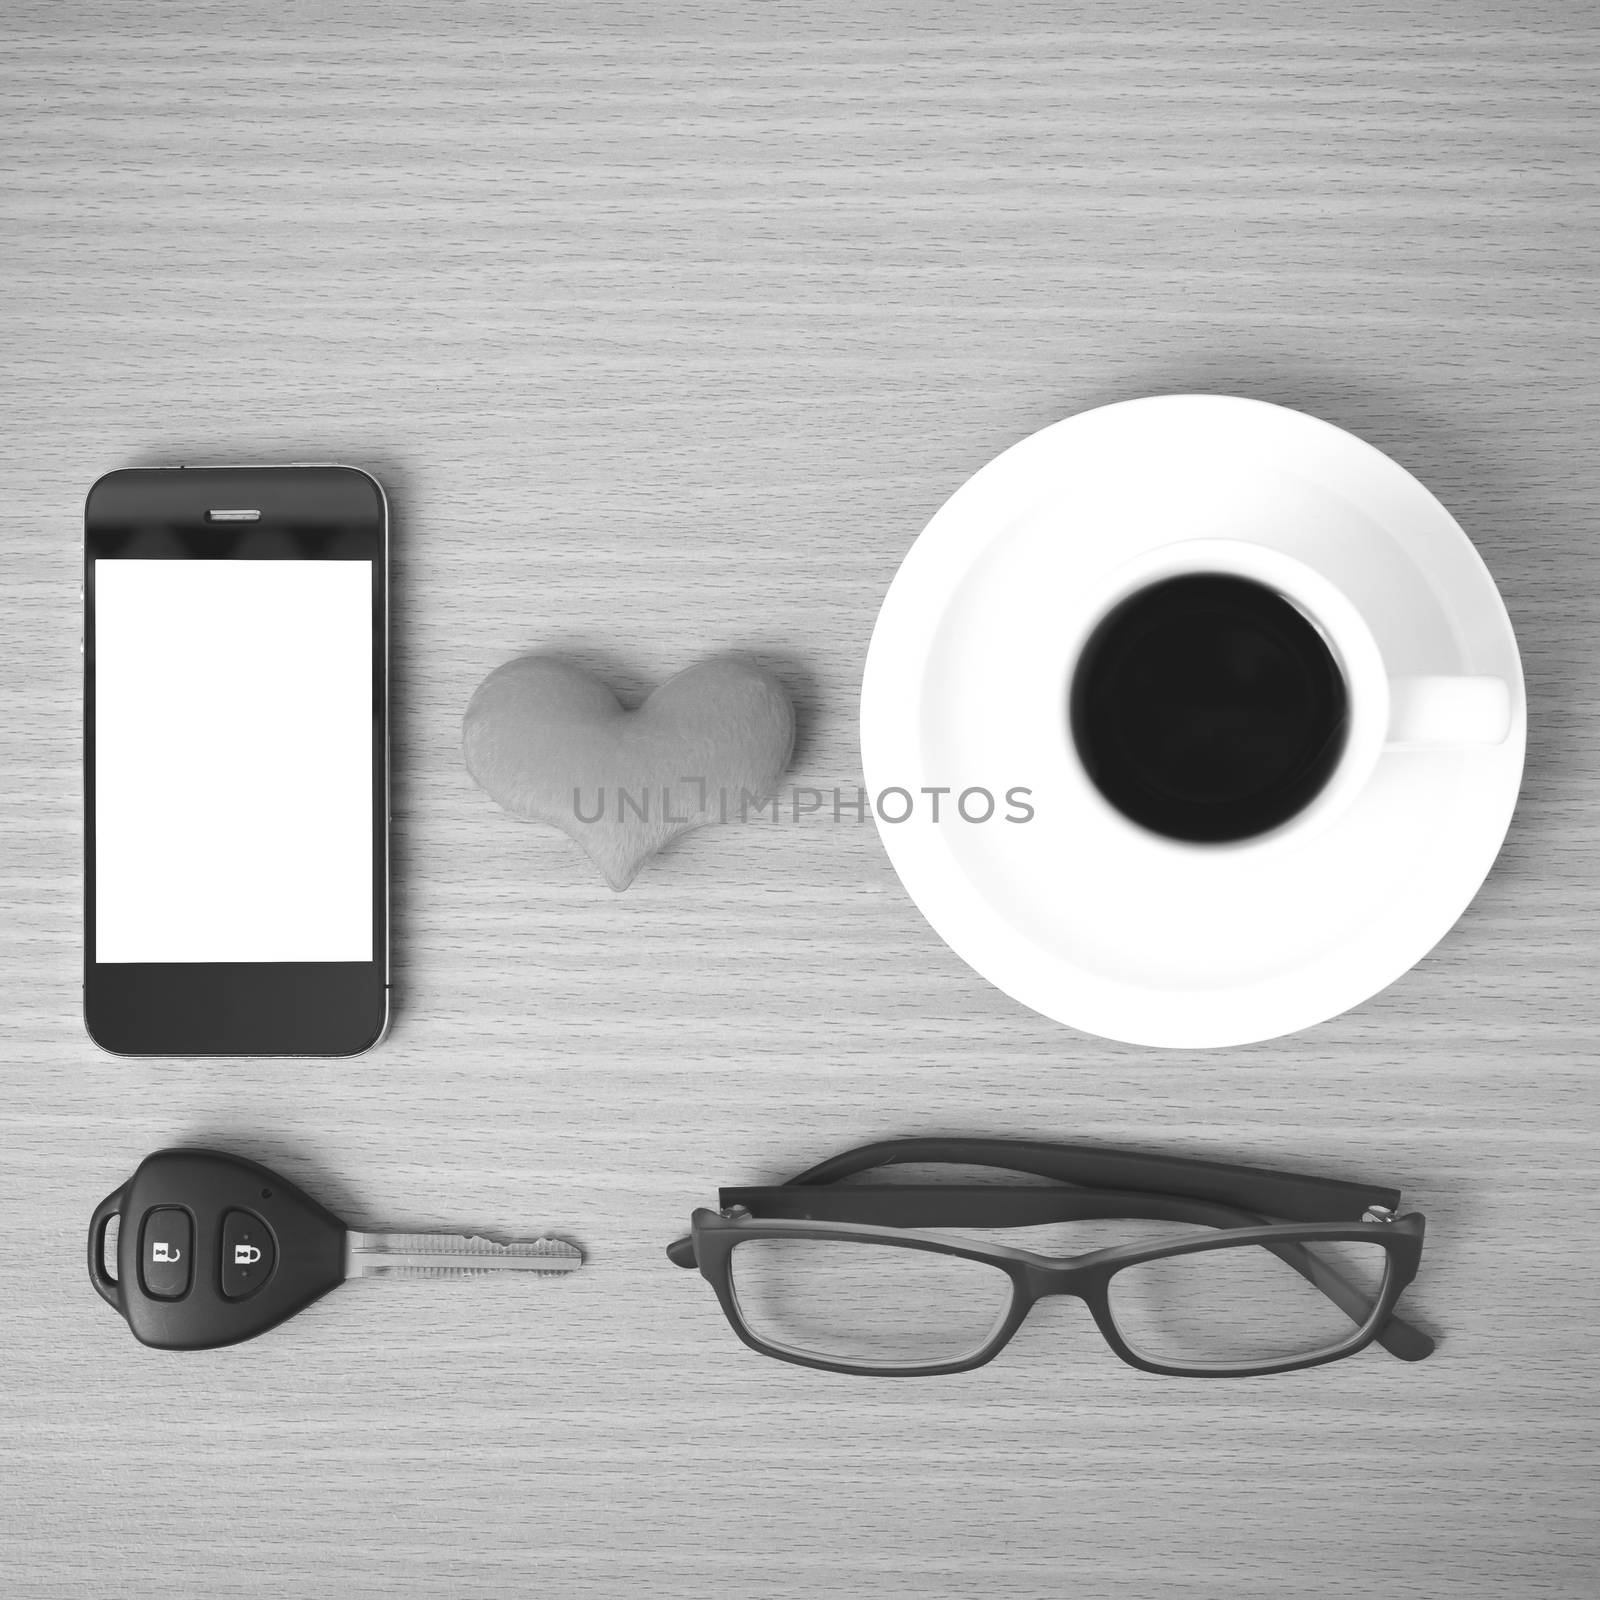 coffee,phone,eyeglasses and car key on wood table background black and white color